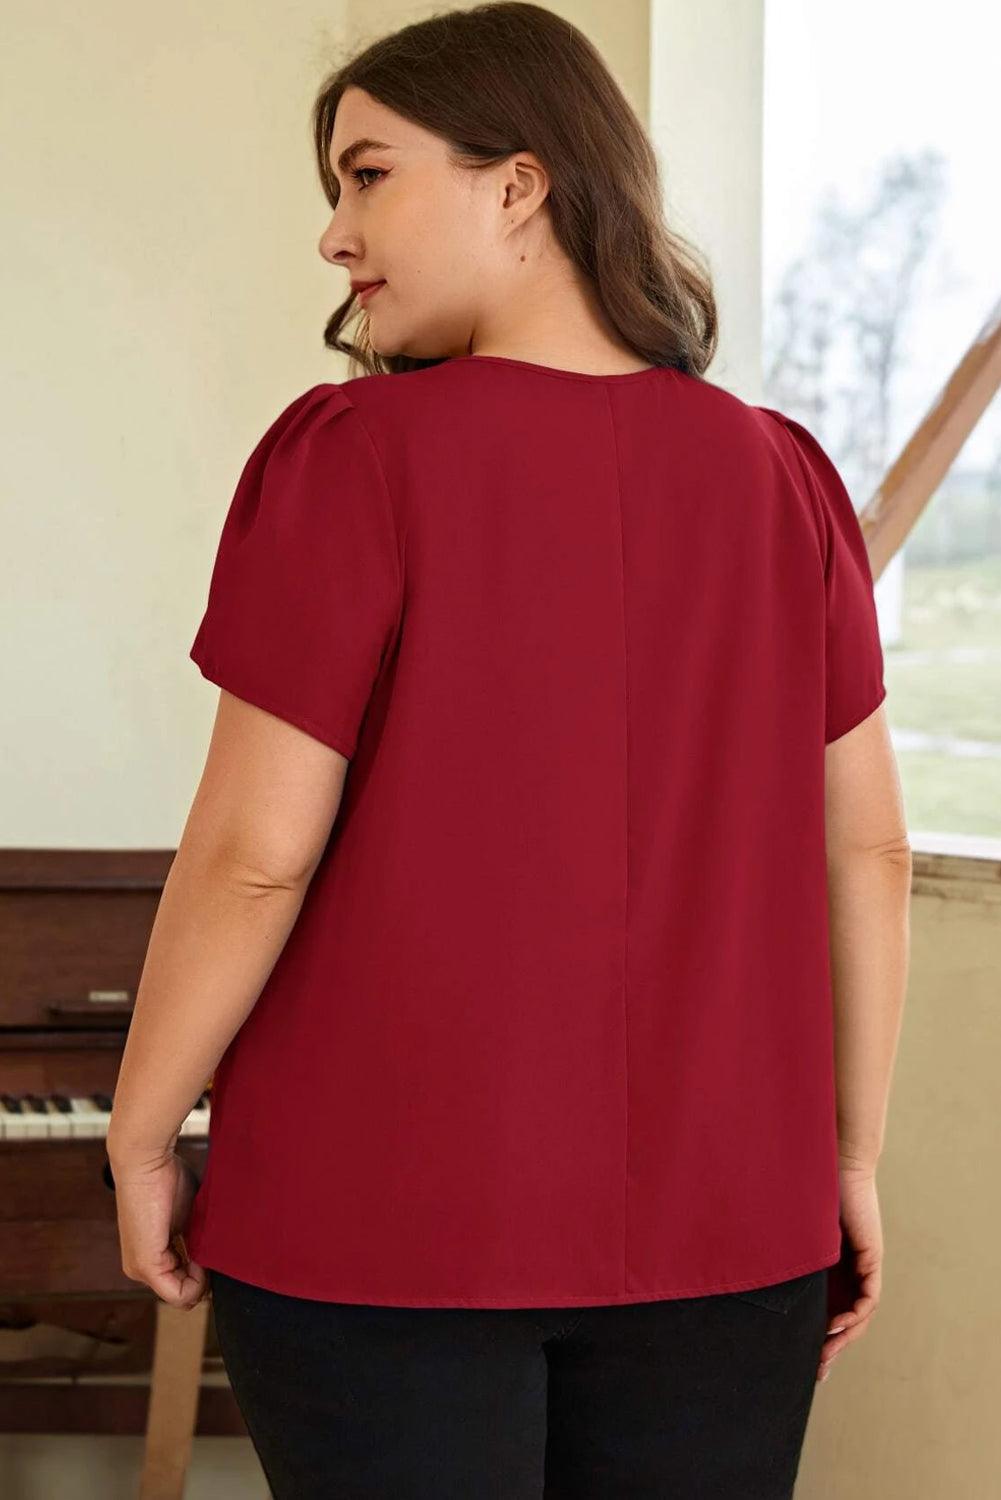 Scarlet Bloom Keyhole Pleated Plus Size Tee - God's Girl Gifts And Apparel